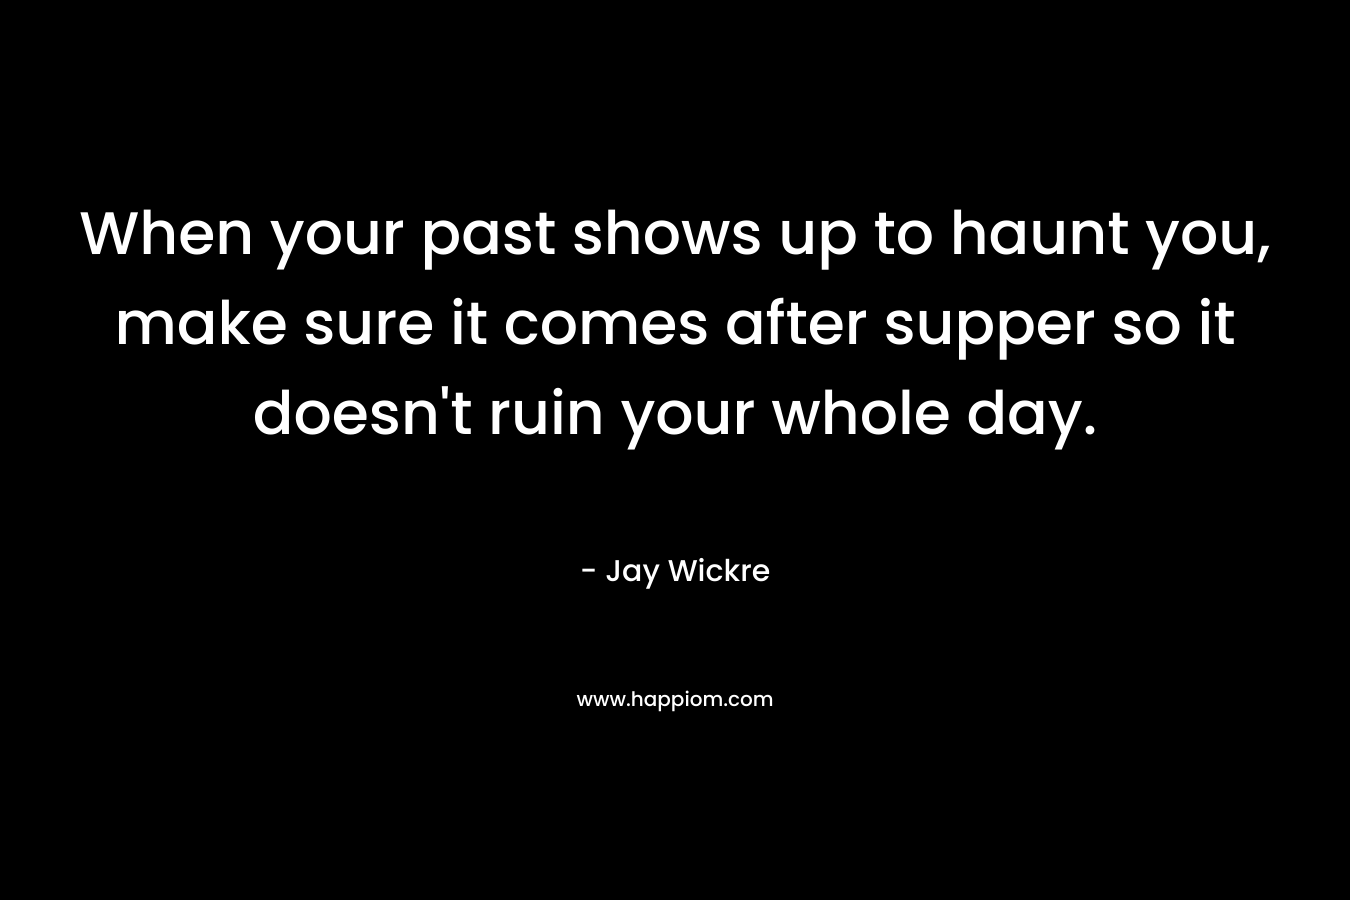 When your past shows up to haunt you, make sure it comes after supper so it doesn't ruin your whole day.